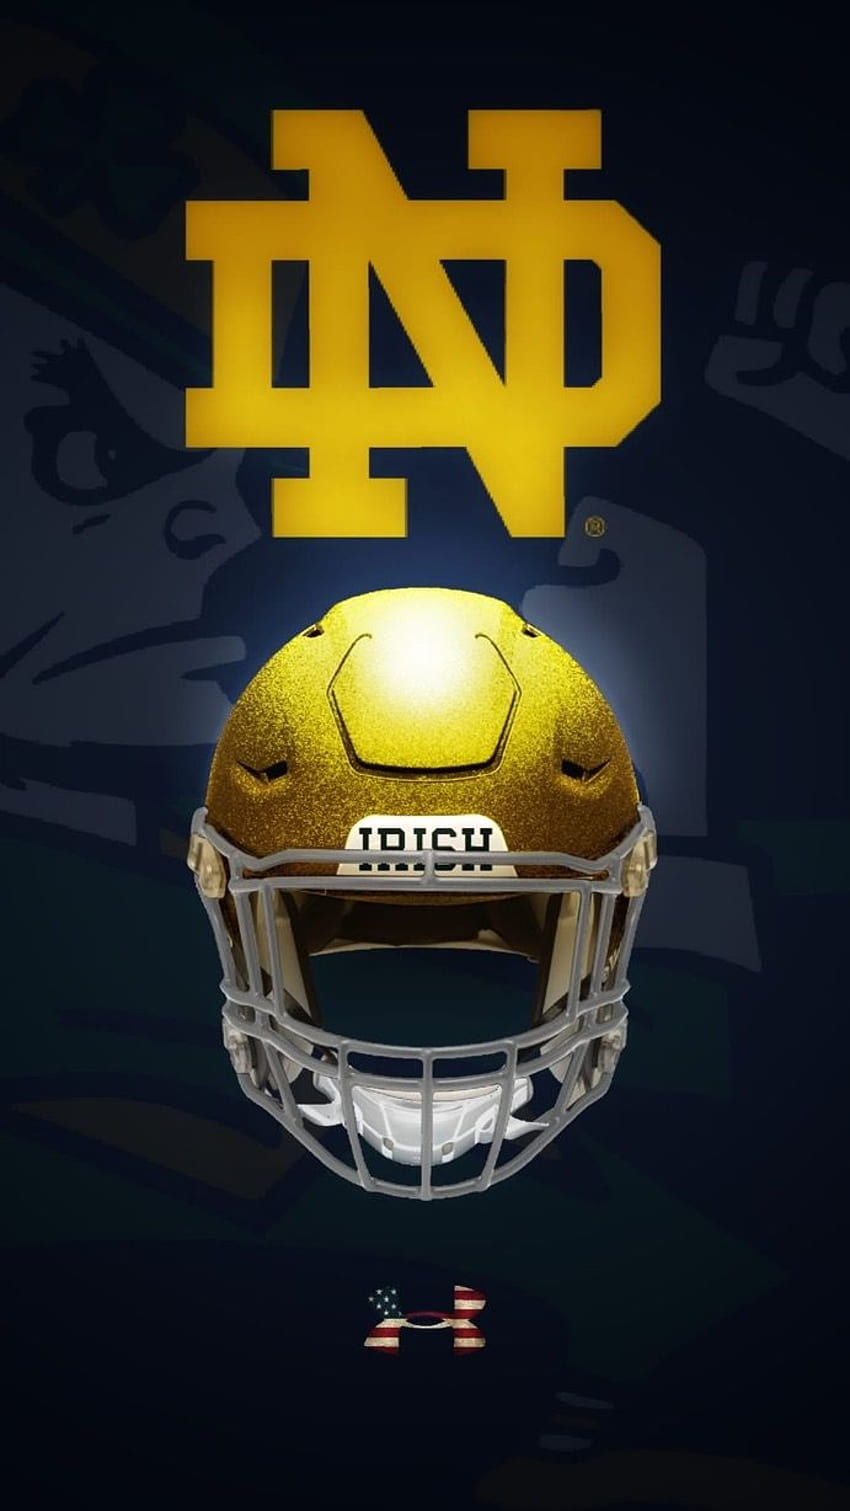 Need a NEW WALLPAPER for your Smartphone Here you GO IRISH GO  Fighting  irish logo Notre dame football Notre dame fighting irish football